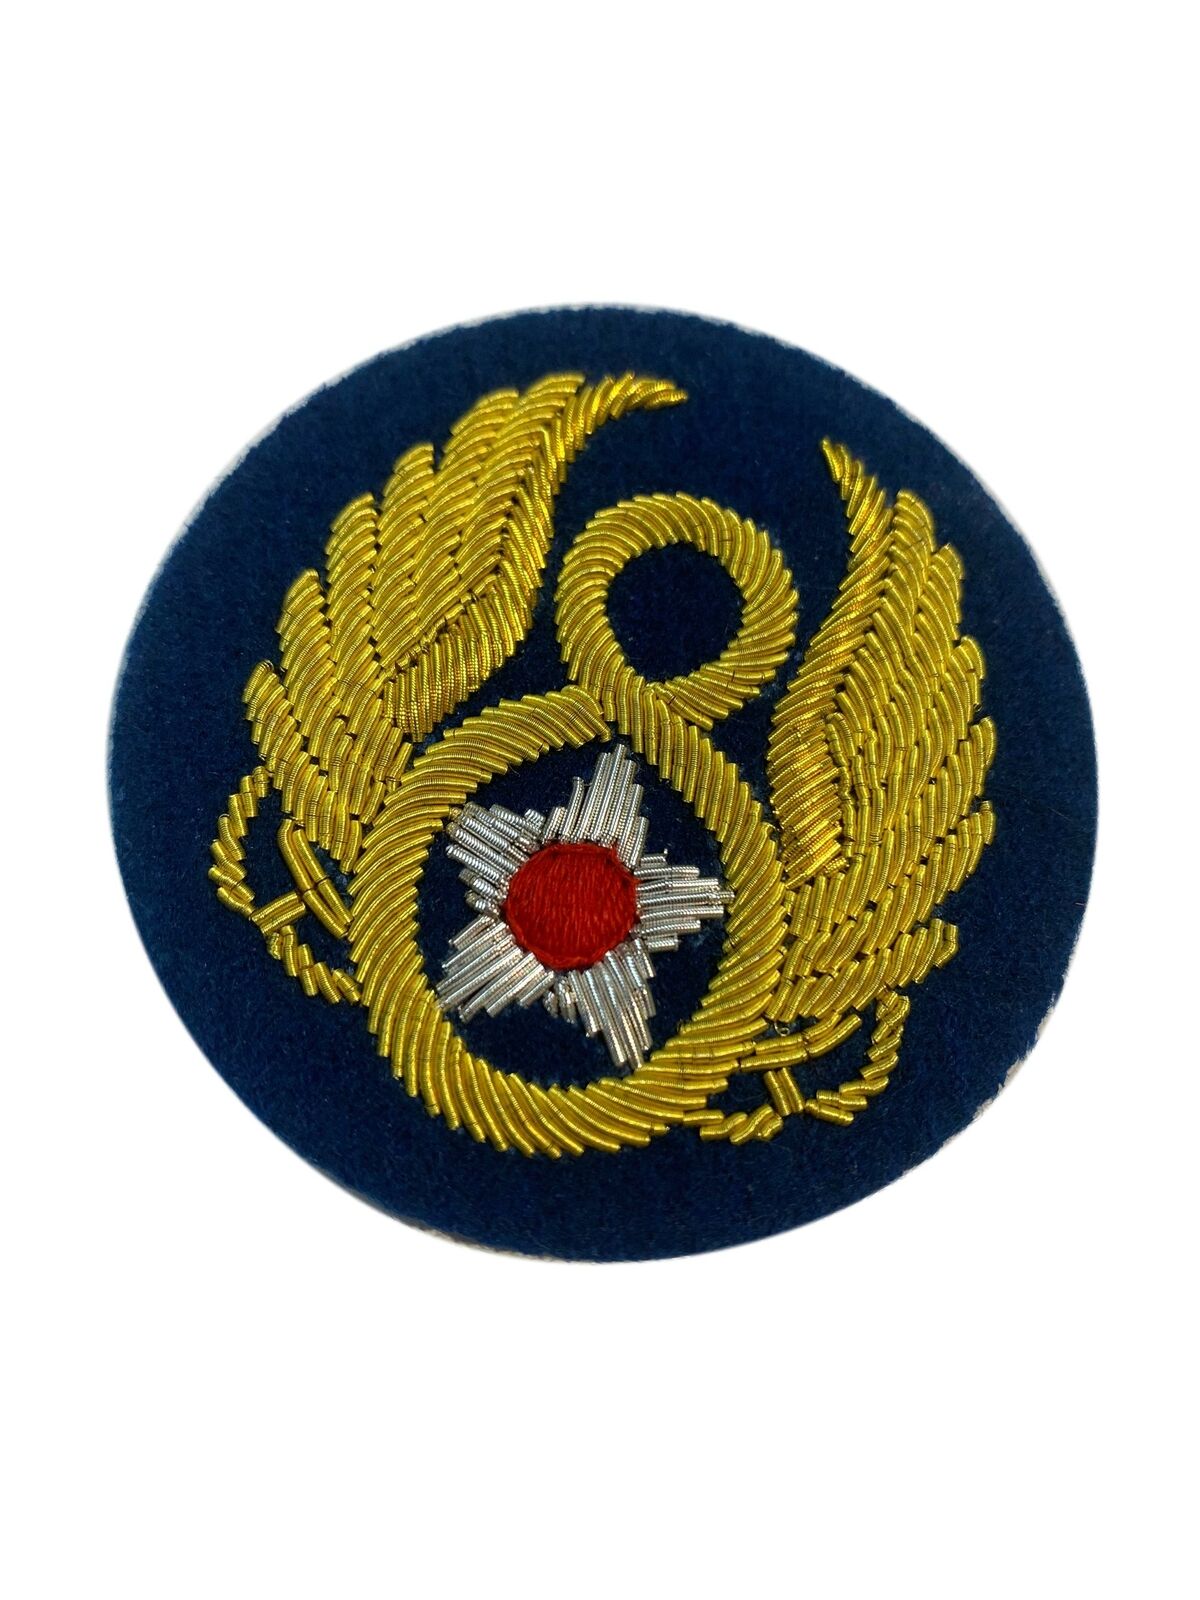 Premium Quality Reproduction WW2 US Patch, 8th Air Force, Hand Sewn Bullion